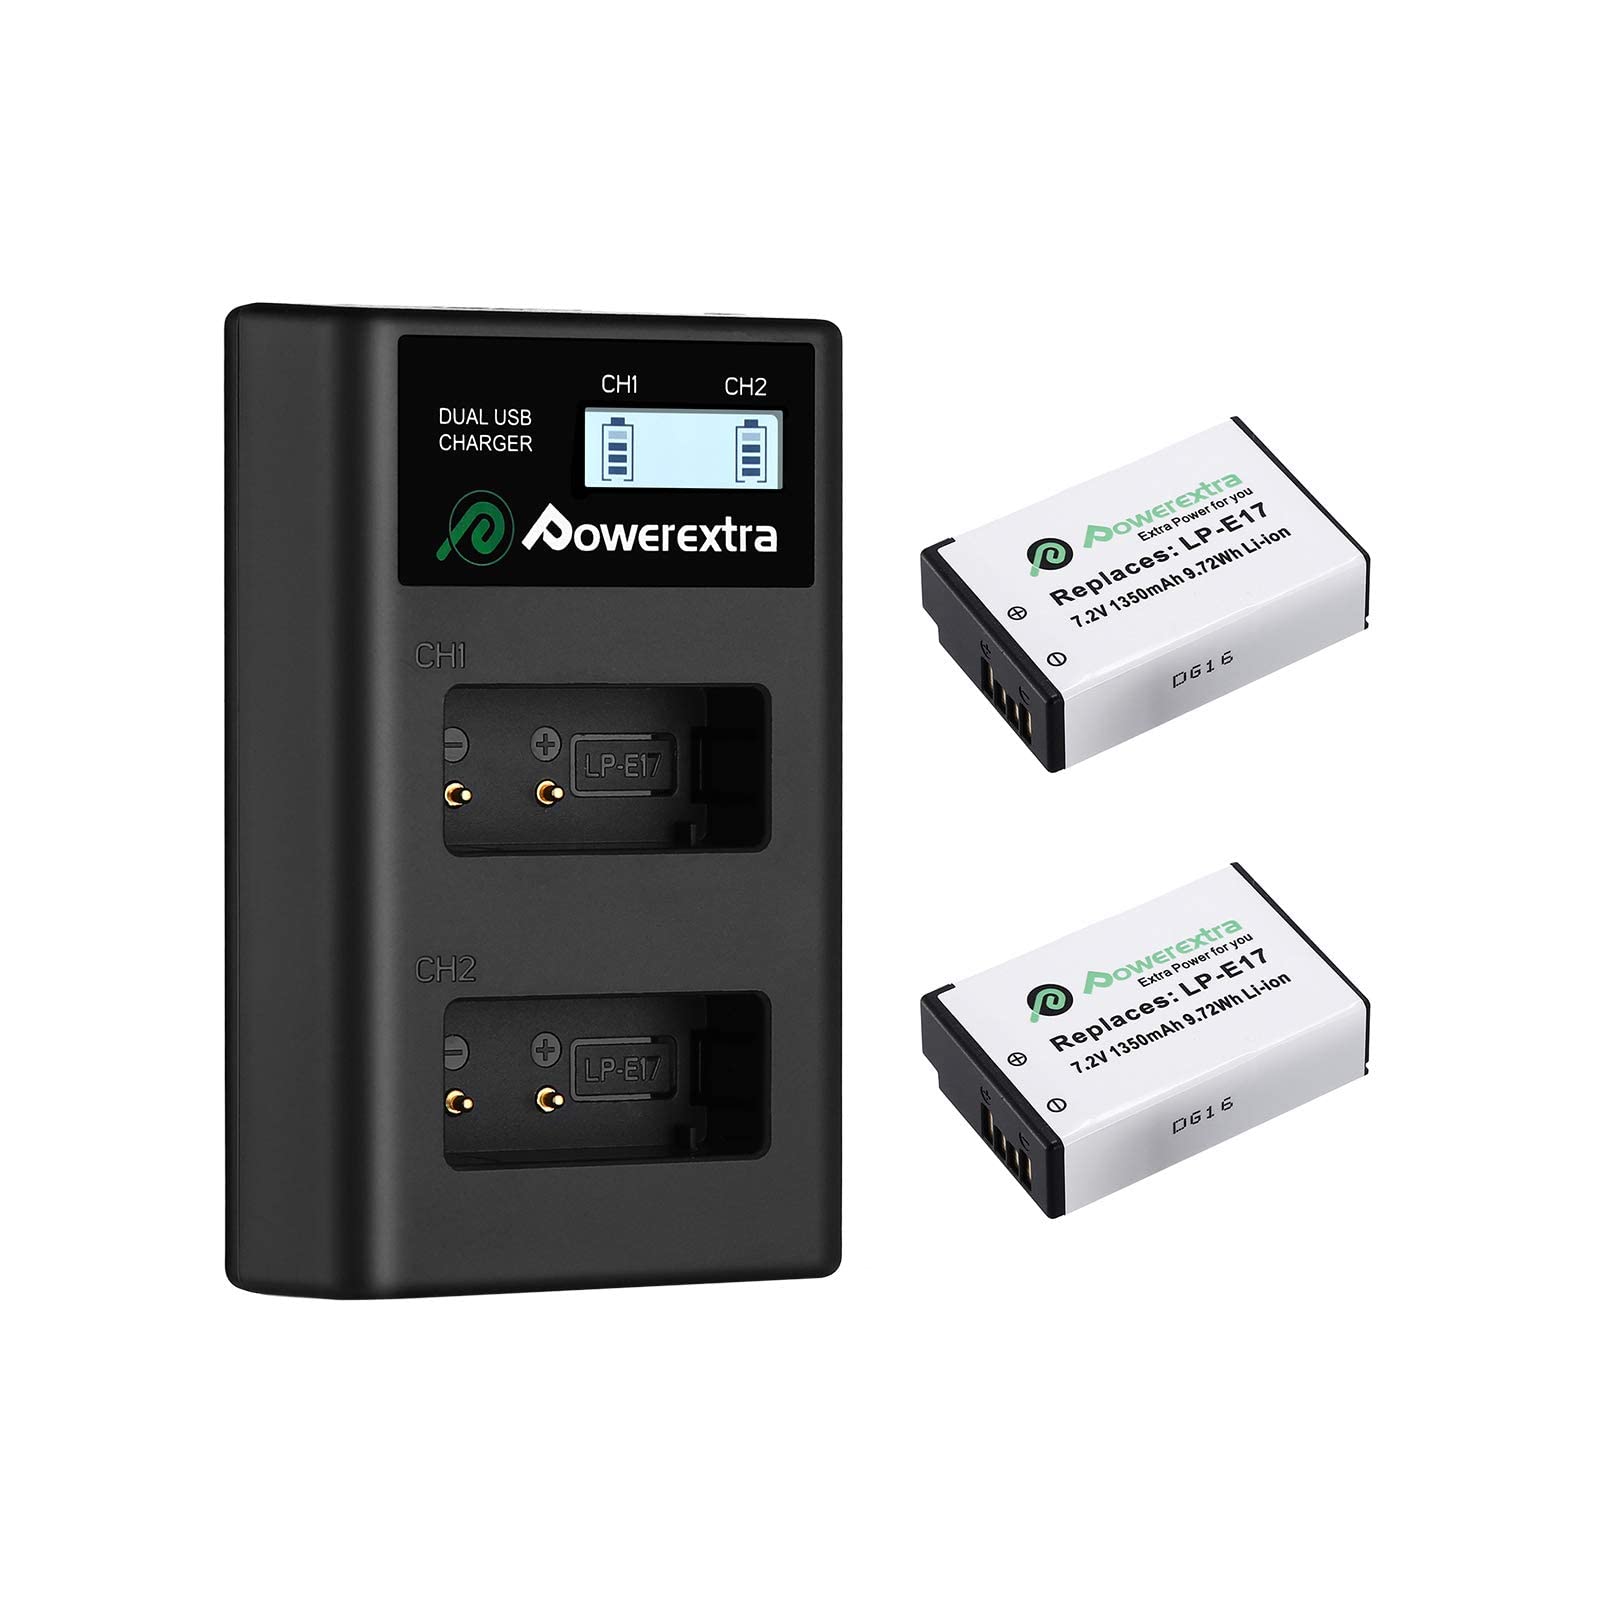 LP E17 Canon Camera Battery and USB Battery Charger | Powerextra